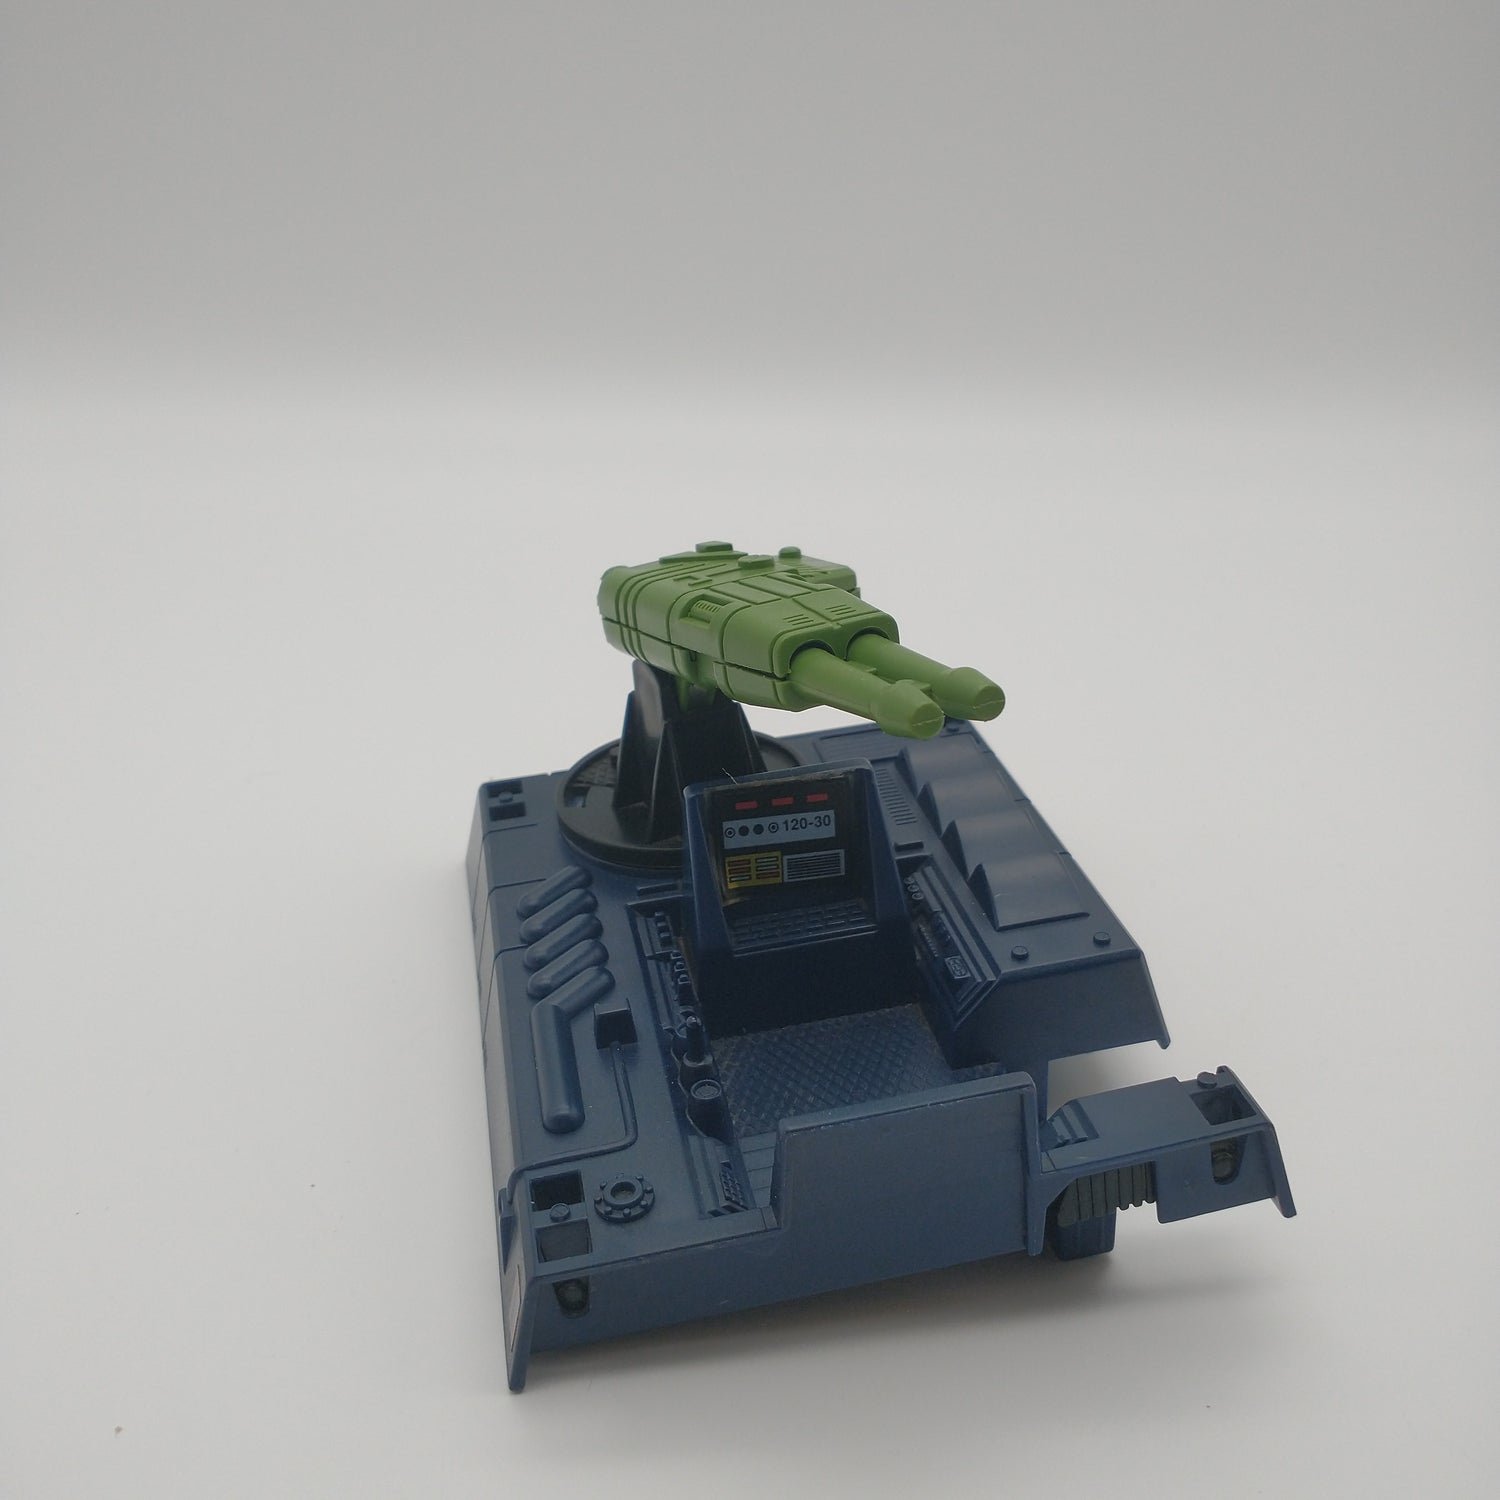 The blue top of the vehicle with the green missile launcher